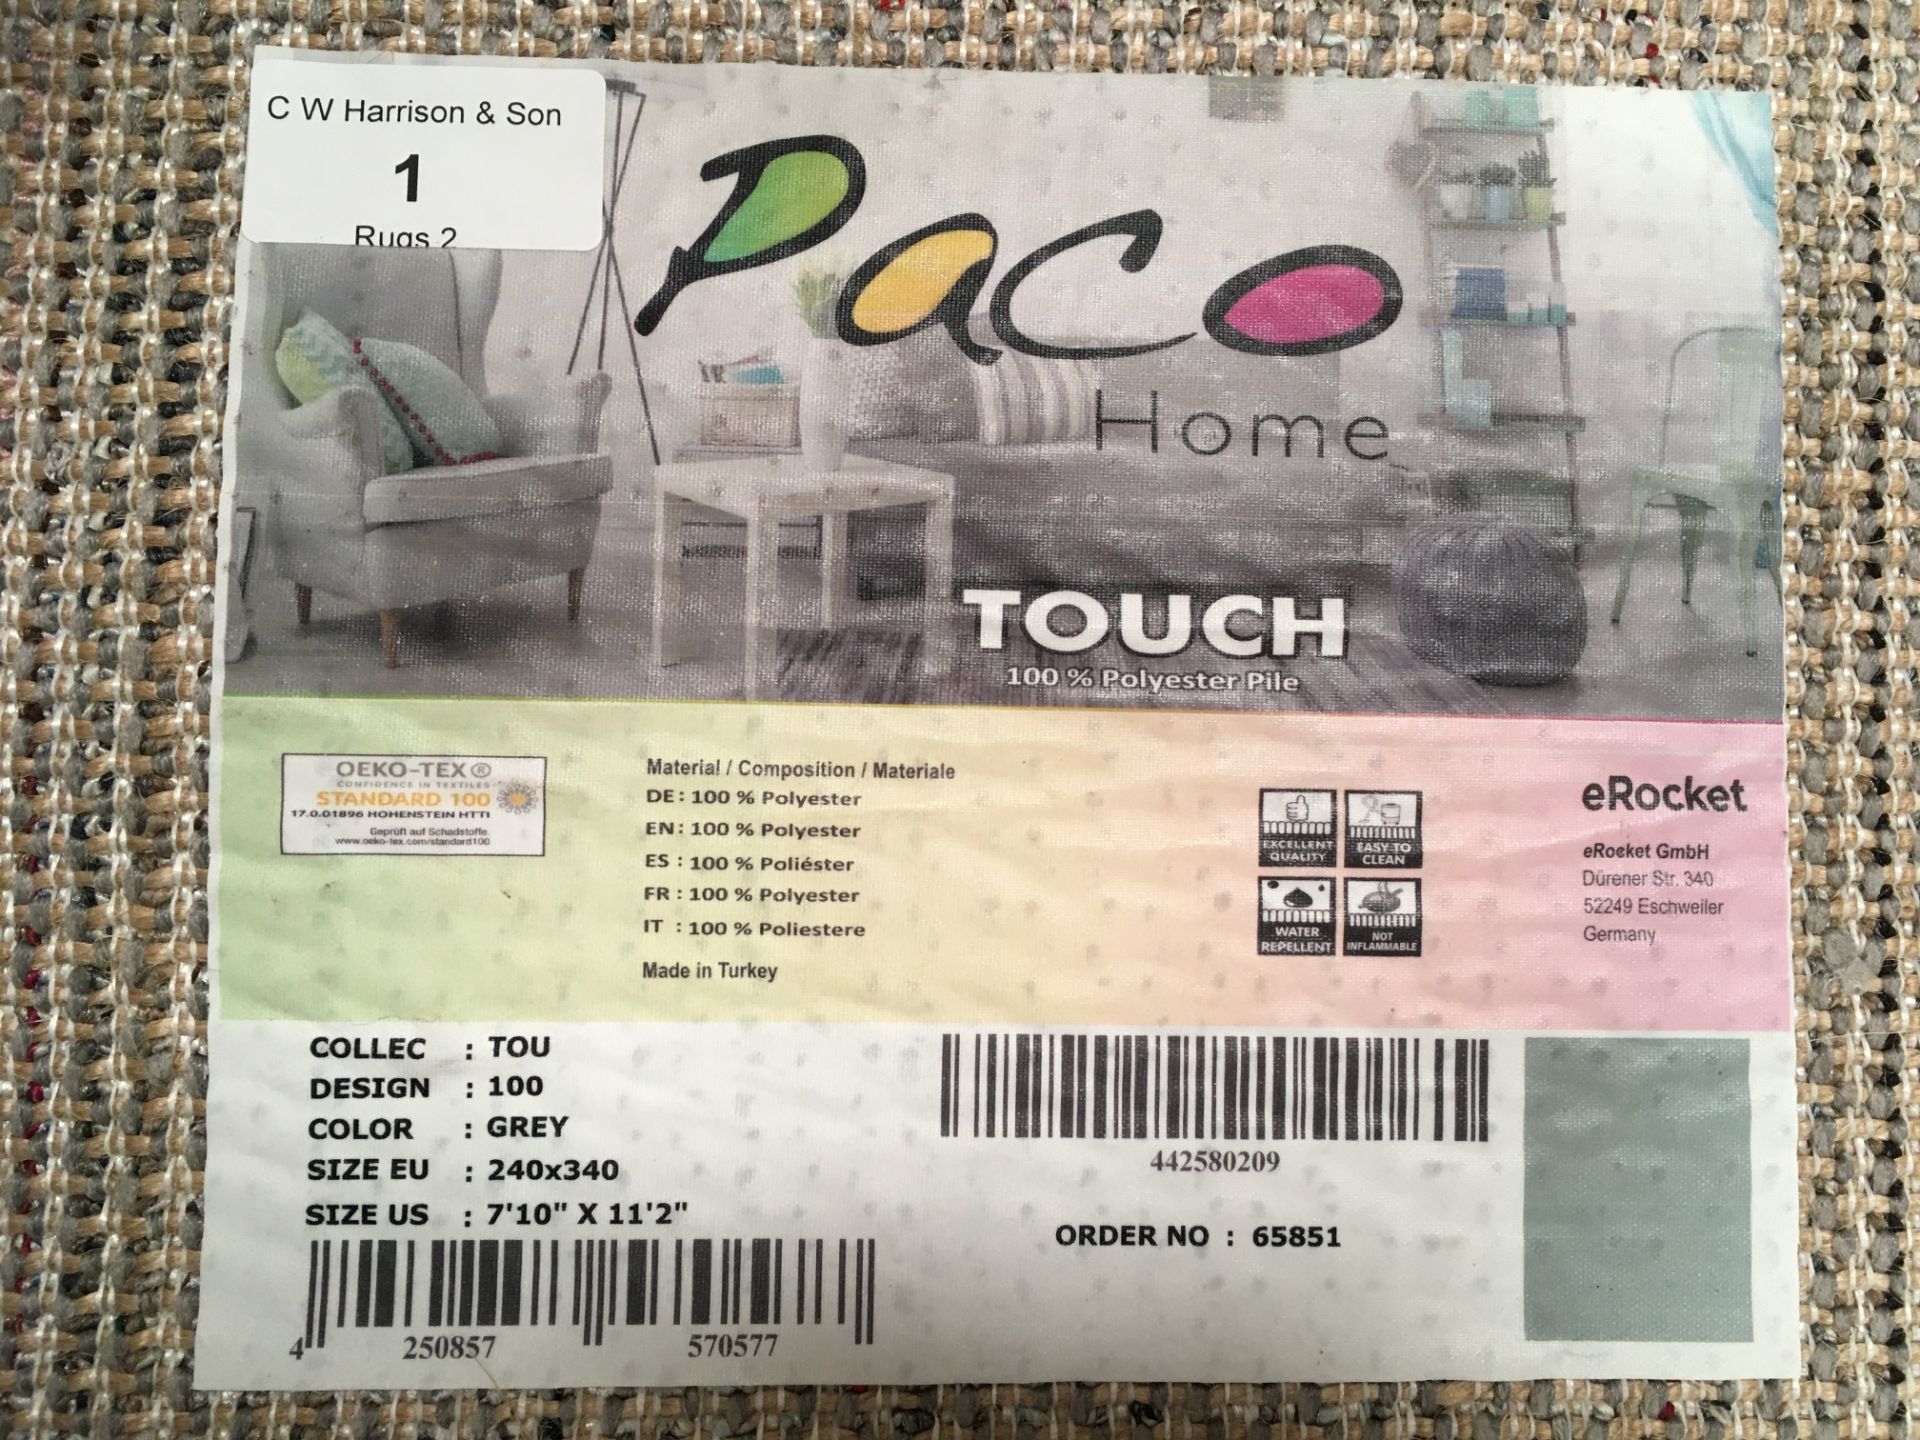 A Paco Home Touch 100 grey rug - 240cm x 340cm - Image 2 of 2